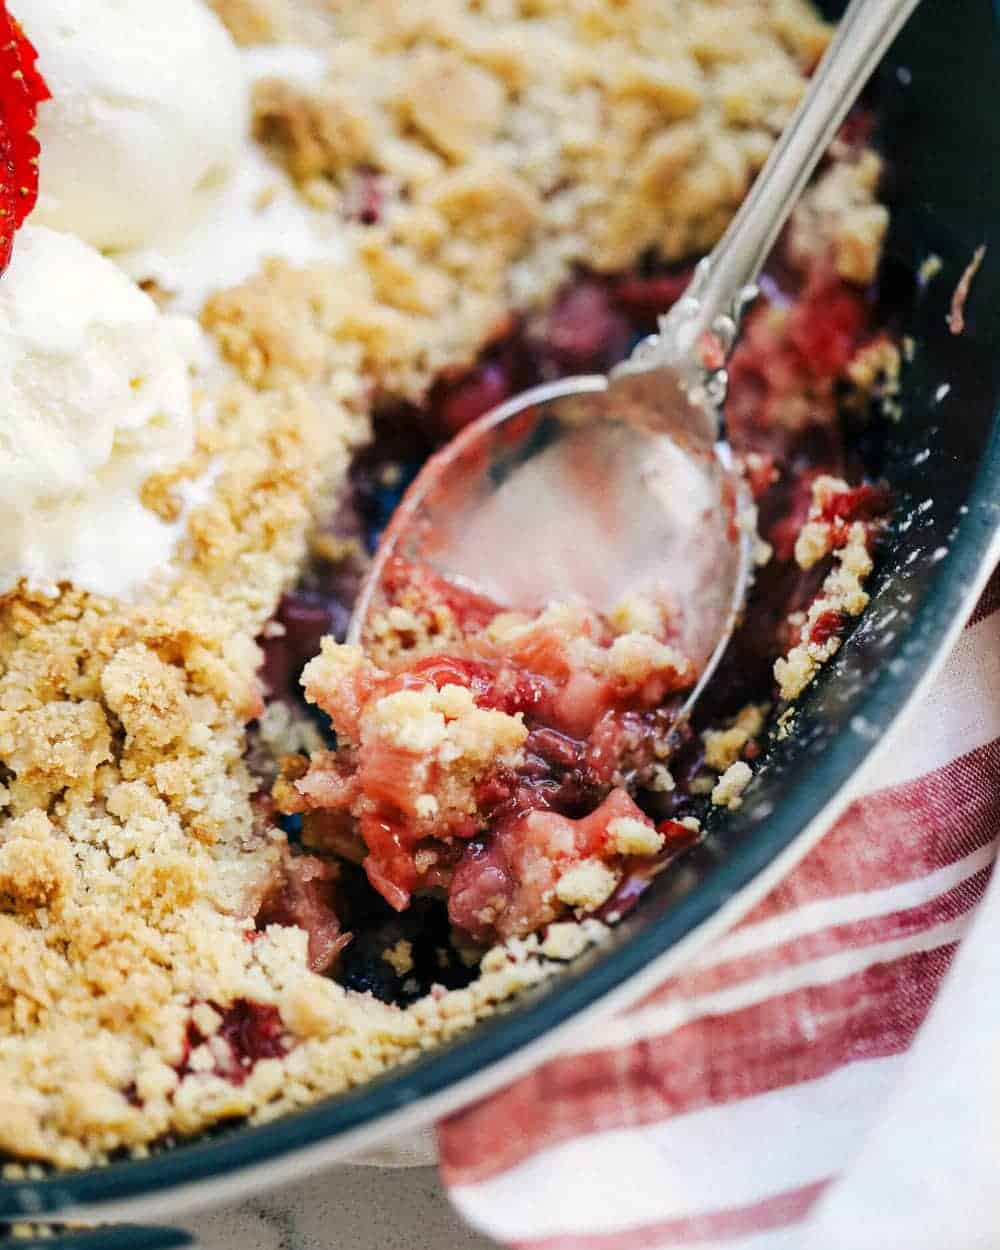 Scooping out strawberry rhubarb crisp with a spoon.